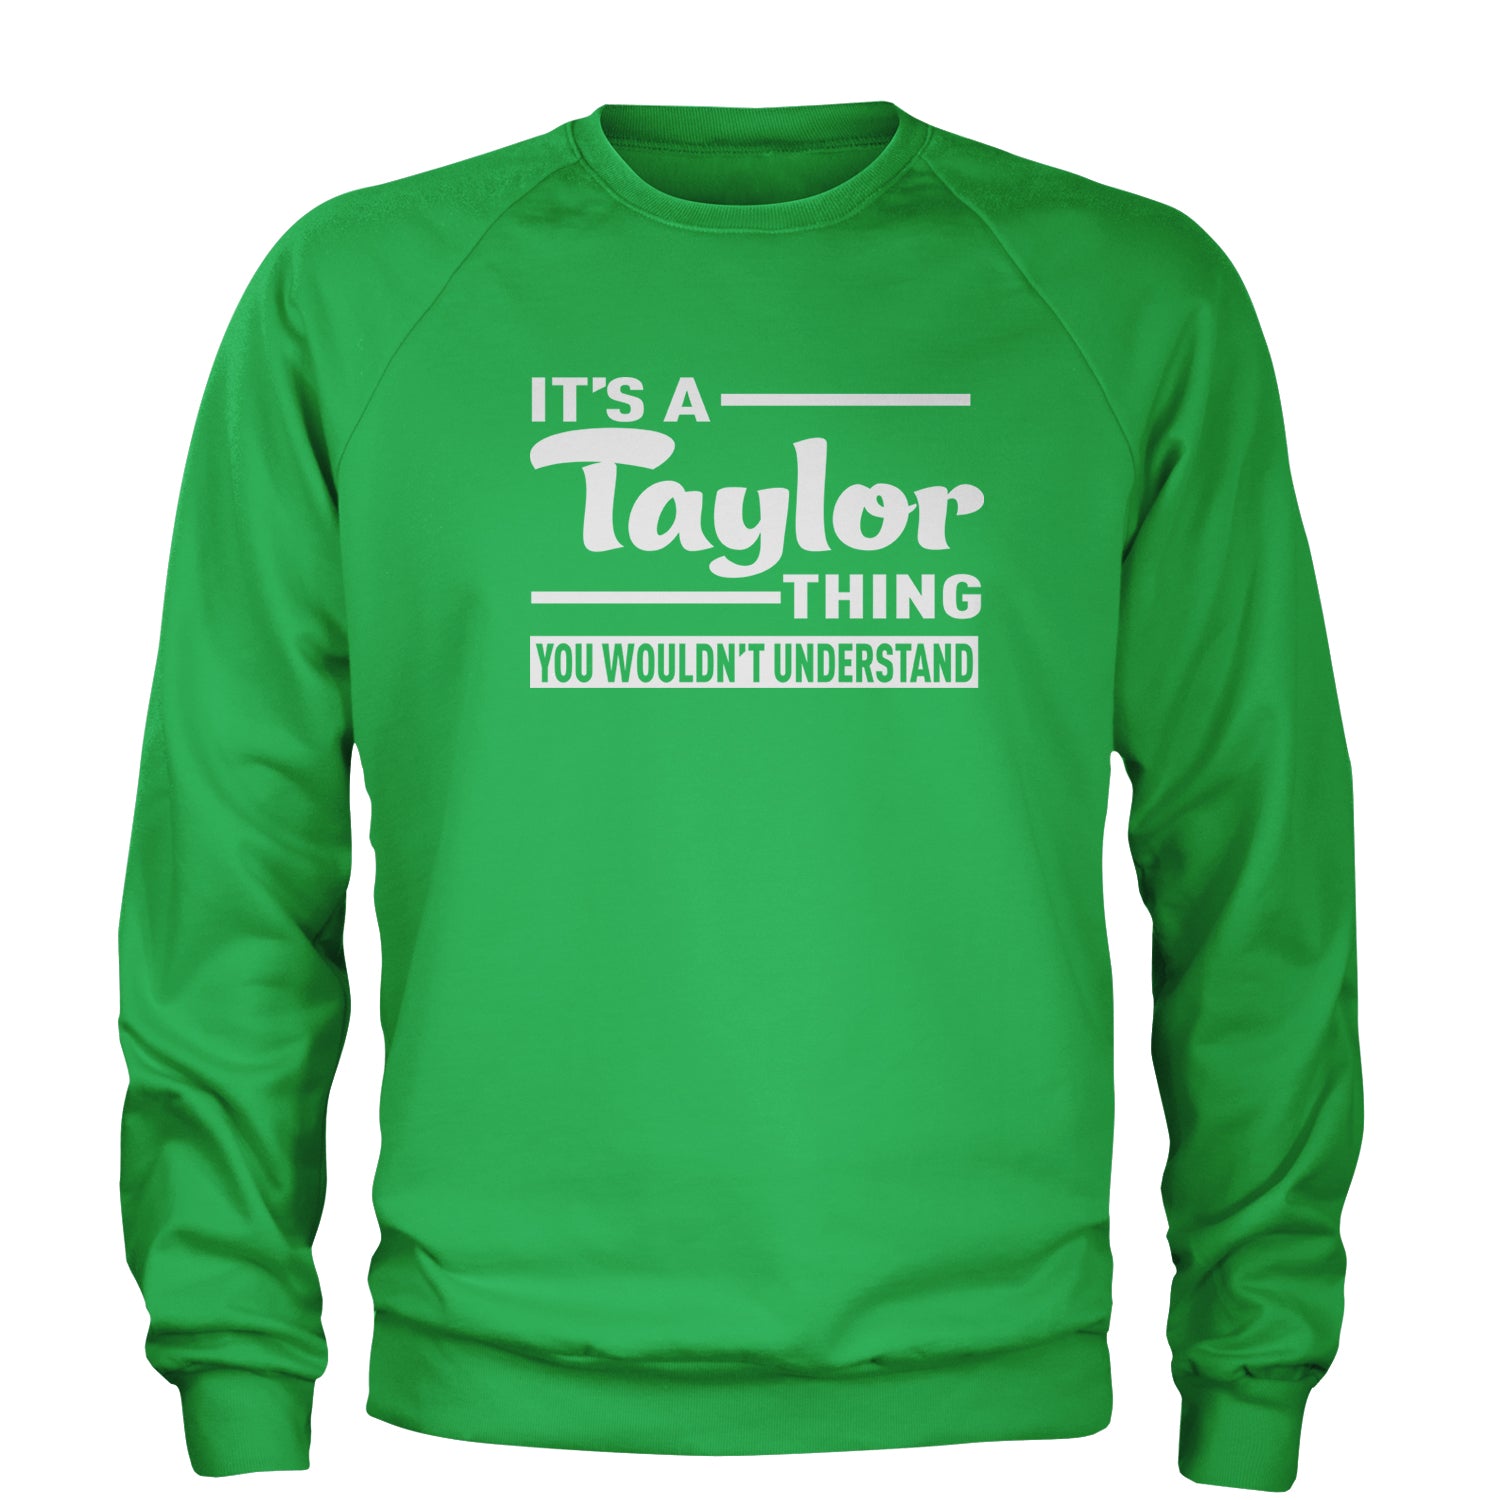 It's A Taylor Thing, You Wouldn't Understand Adult Crewneck Sweatshirt nation, taylornation by Expression Tees